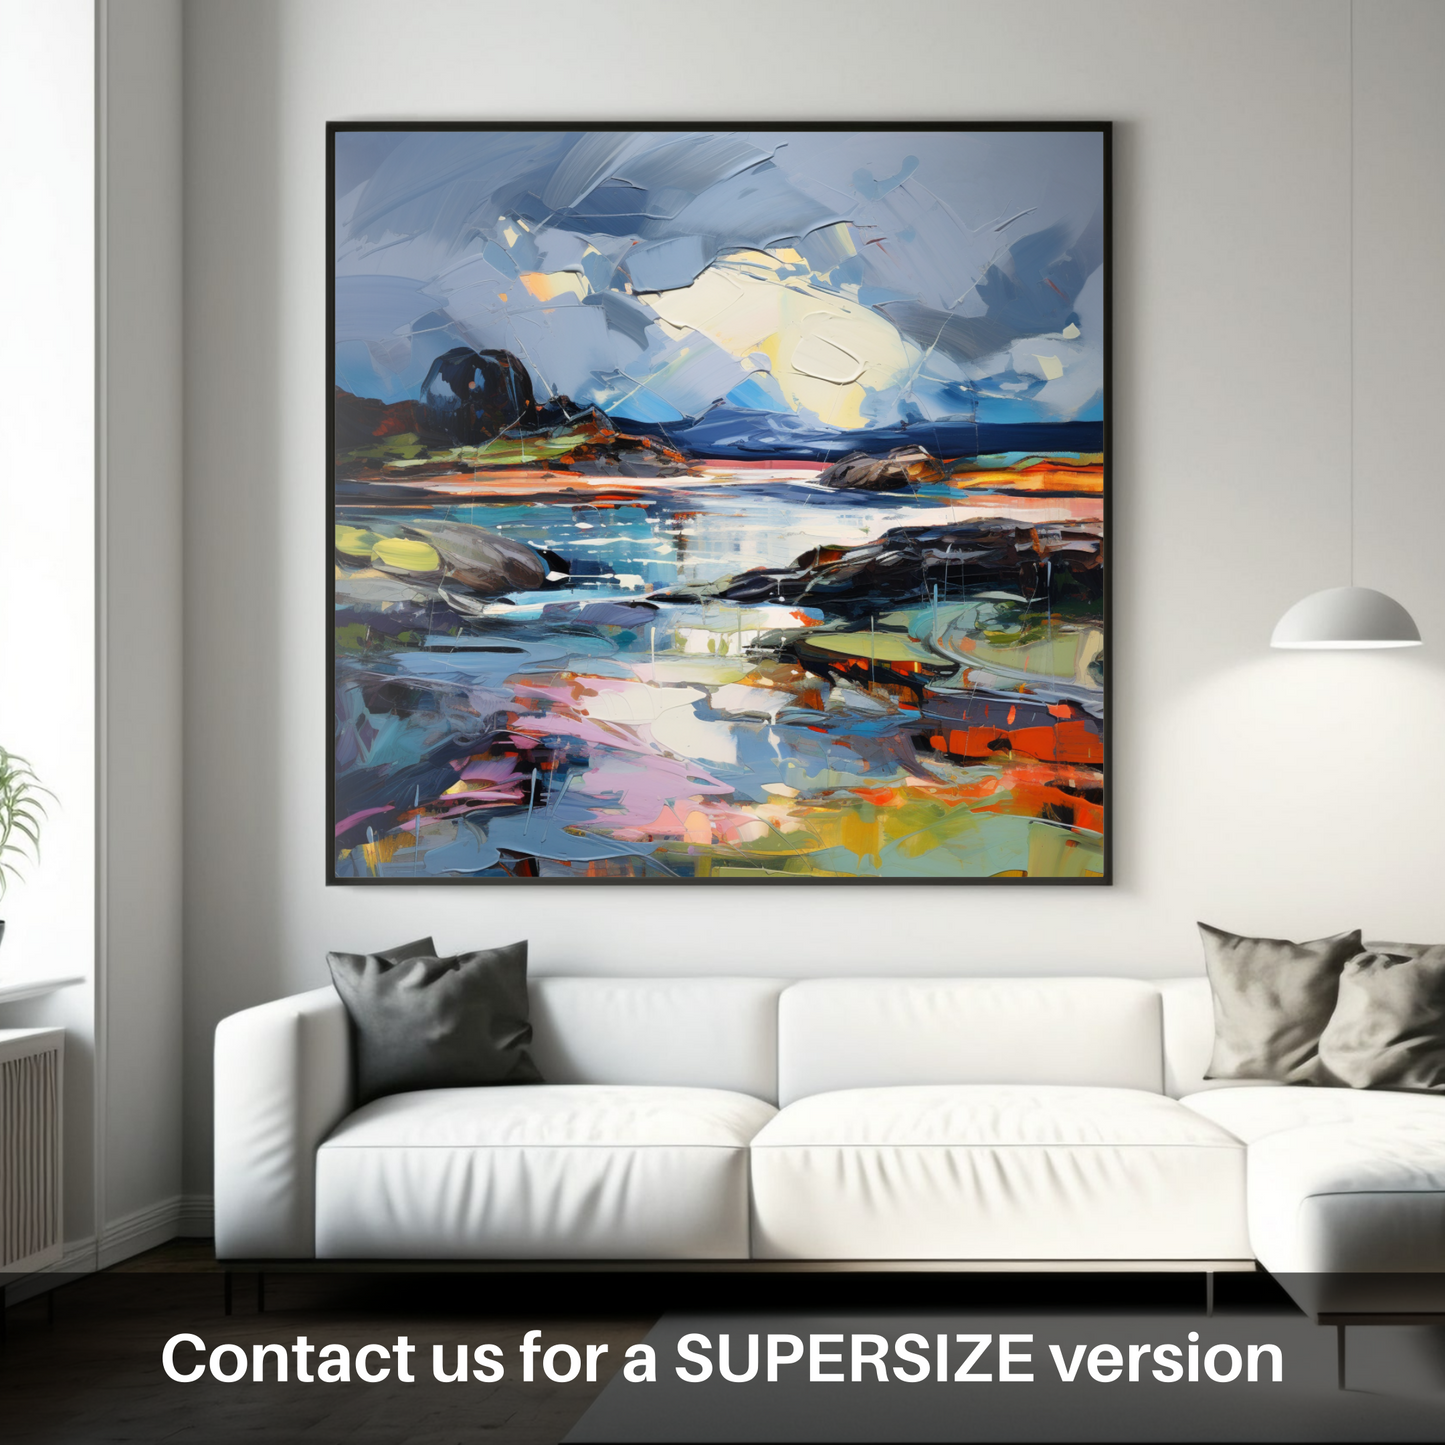 Huge supersize print of Ardtun Bay with a stormy sky